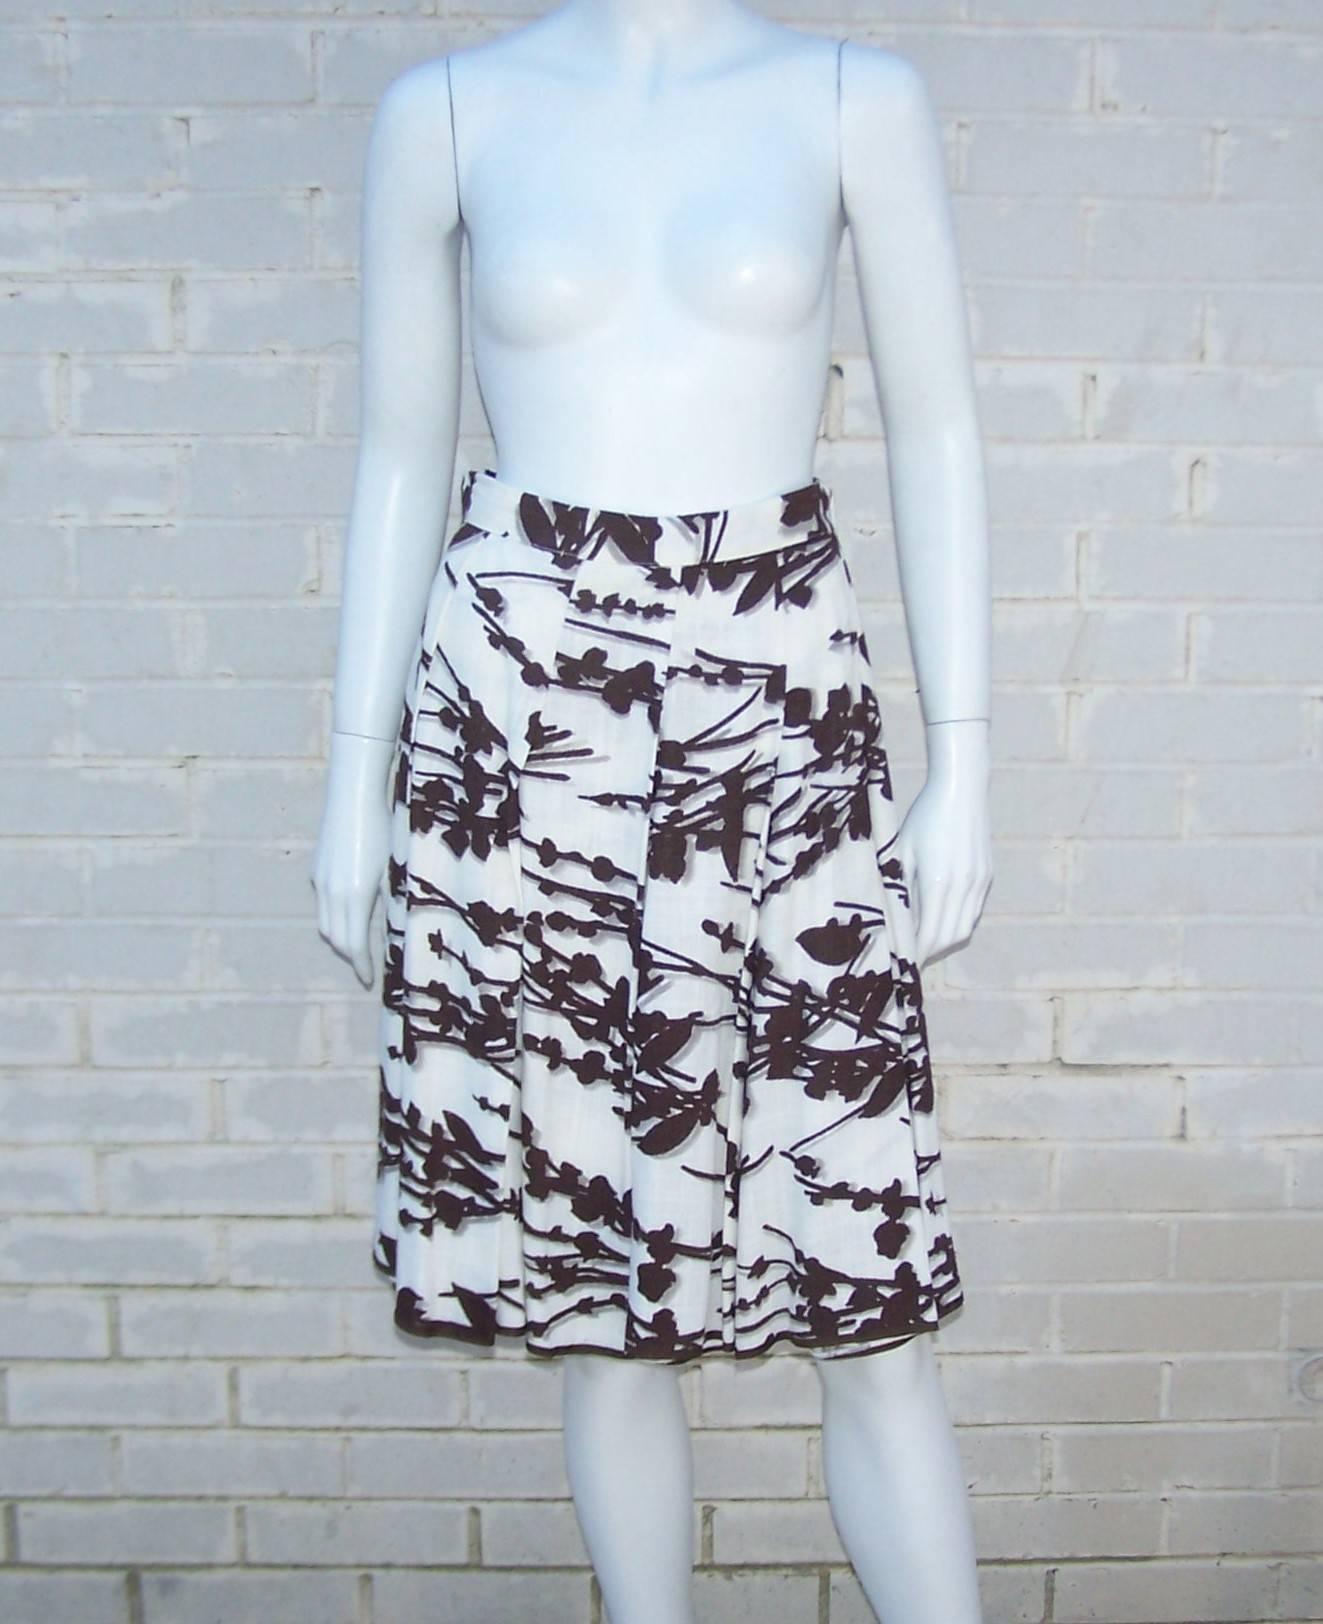 This summery Prada skirt has the look of an open weave linen though it is actually a viscose rayon.  It zips and hooks at the side with top stitched pleating and banding at the hemline.  The unique brown and white abstract flora print has a 3-D op